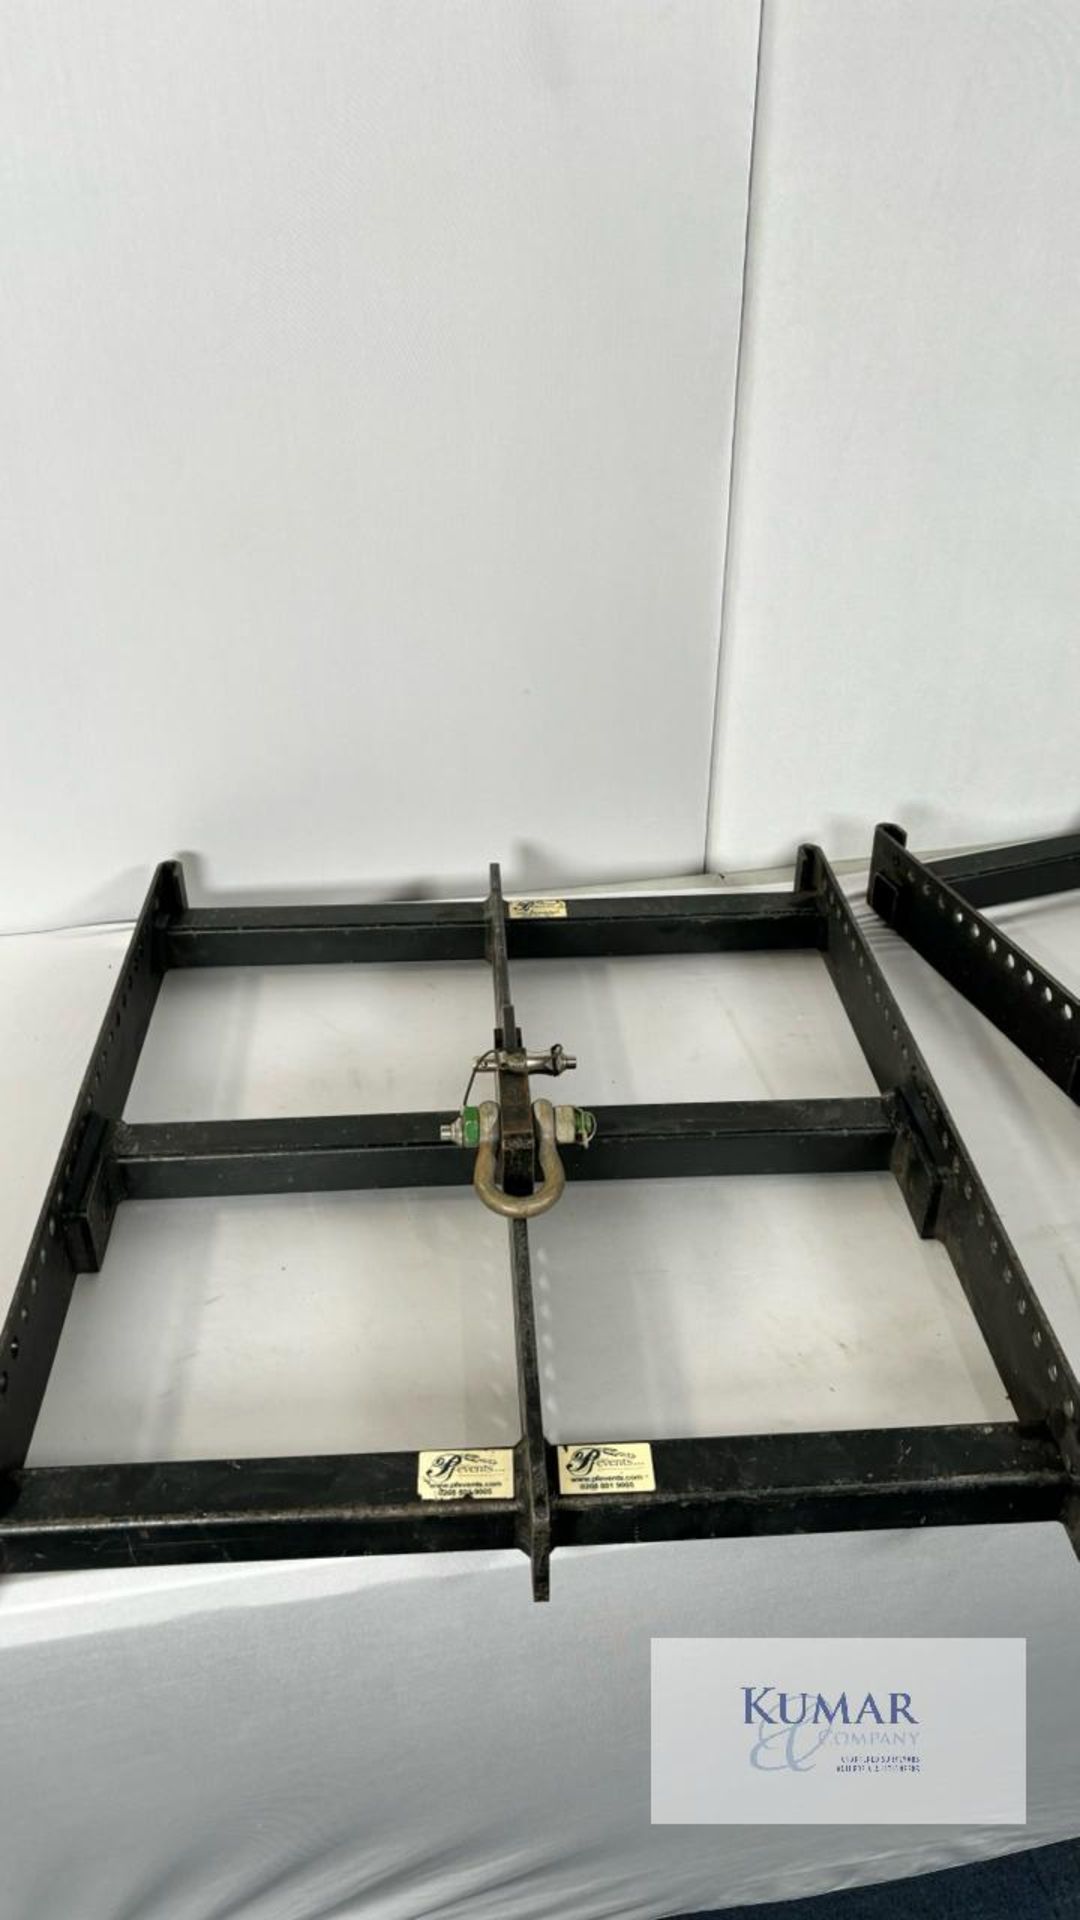 2 x D&B Q1 Flying Frames with D&B load adaptors Function condition - frame and load adaptors - Image 6 of 9